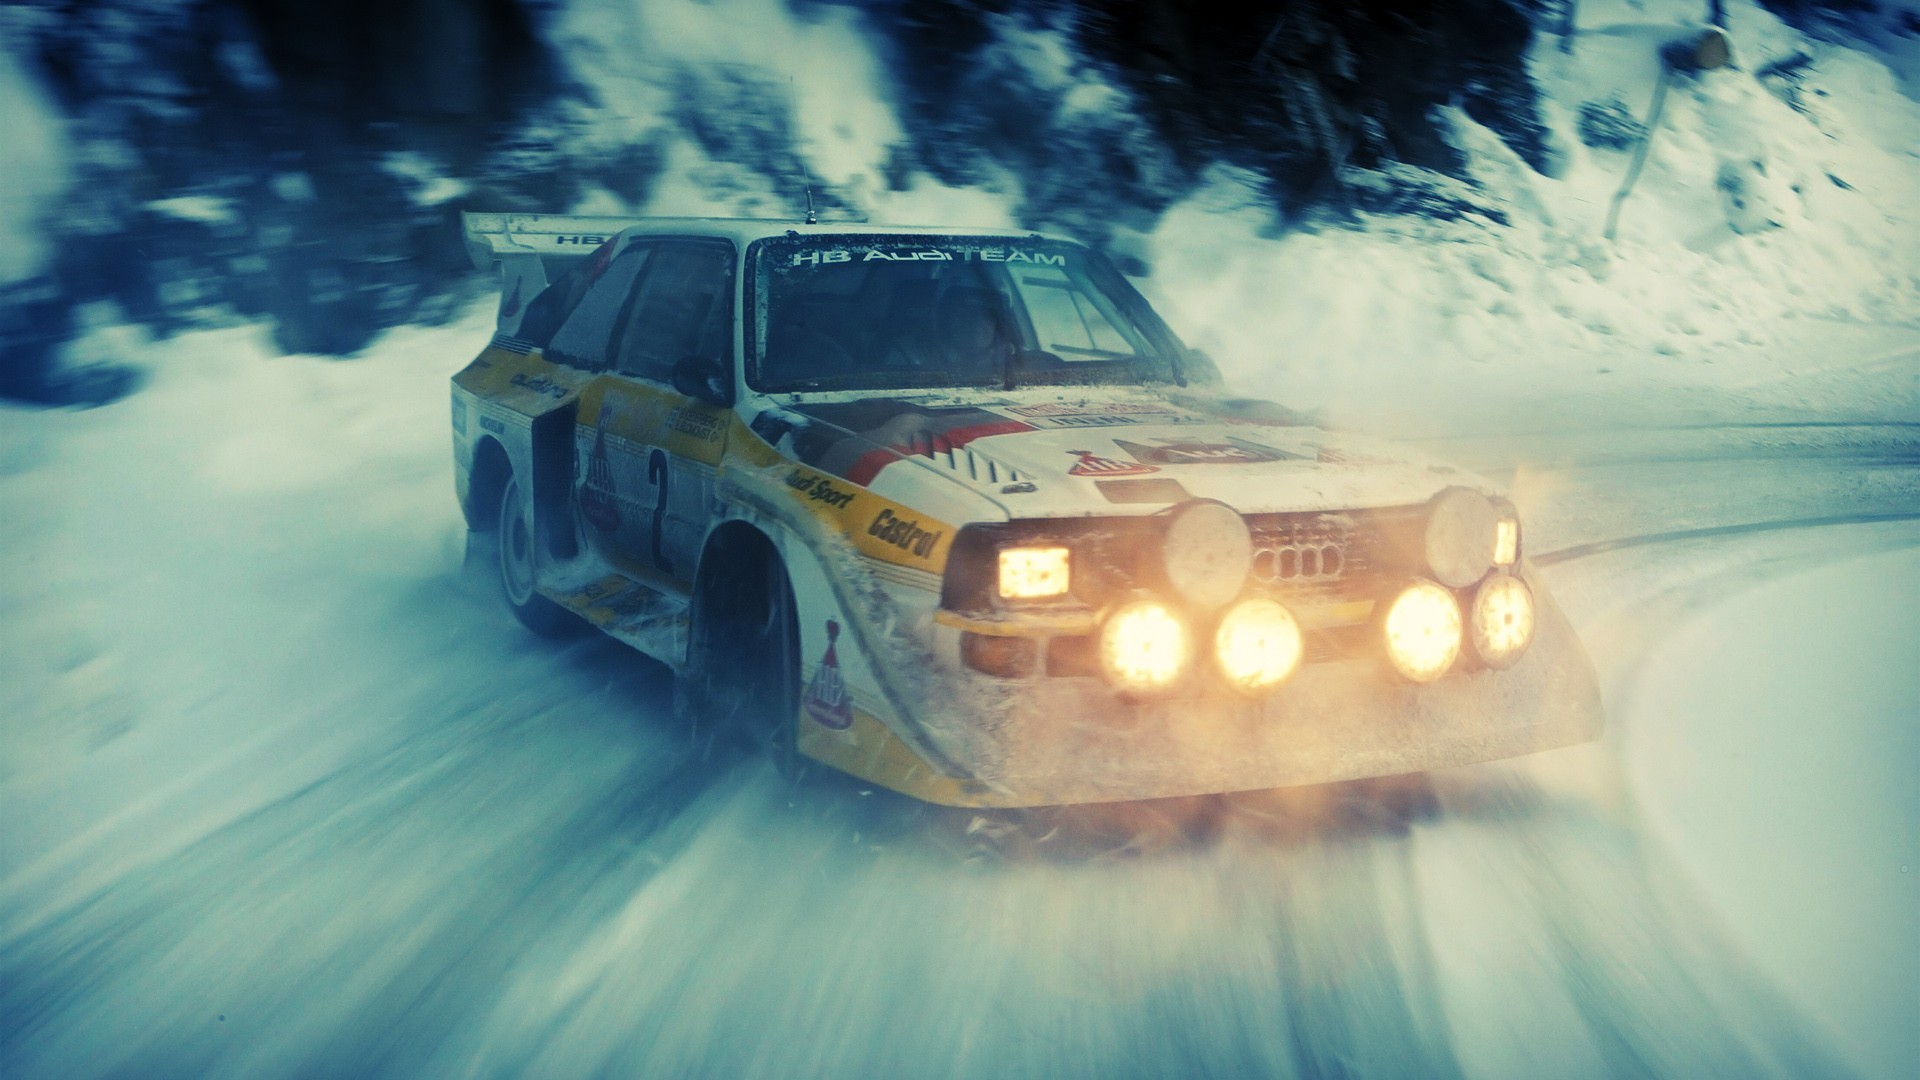 Audi, Old Car, Car, Sports Car, Sports, Snow, Lights, Audi Quattro, Rally,  Rally Cars Wallpapers HD / Desktop and Mobile Backgrounds